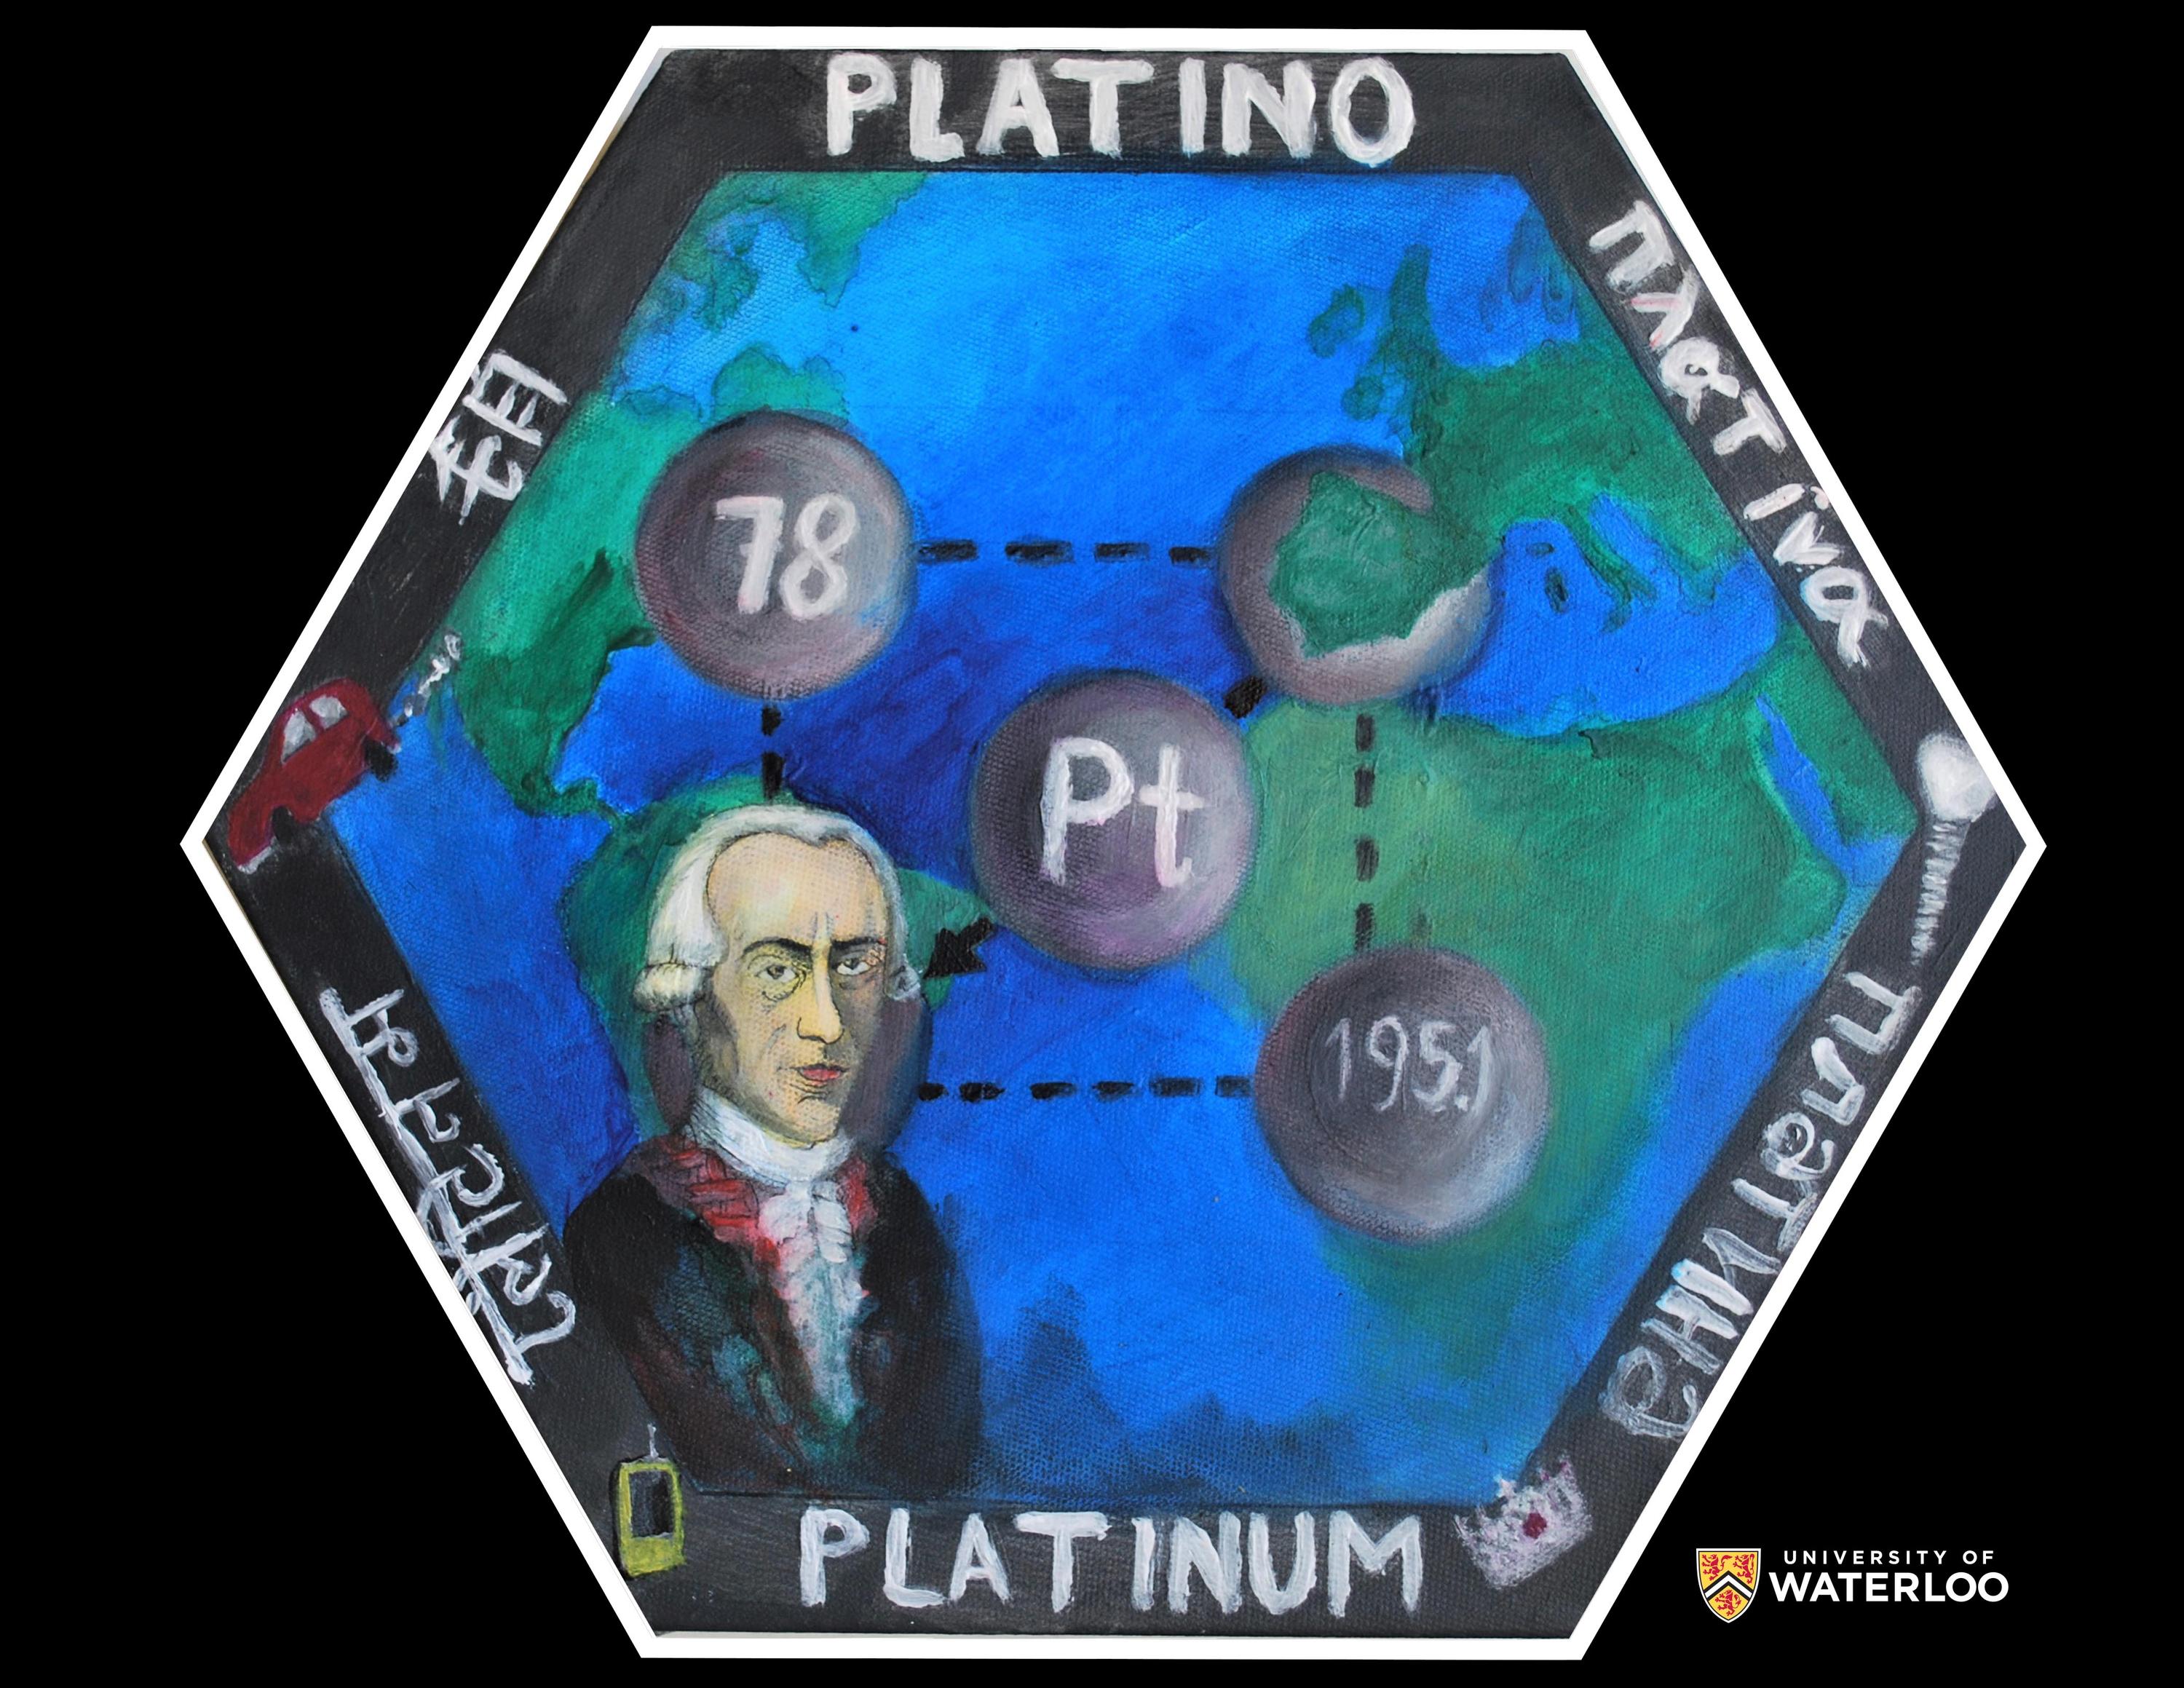 Ink and acrylic on bright blue background. Antonio de Ulloa appears bottom left. Behind him is a map of the world with “78”, “Pt” and “195.1” marked as destinations. The edge of the tile is decorated with images of cars, electronic devices and cars, “Platinum” in different languages, including English.